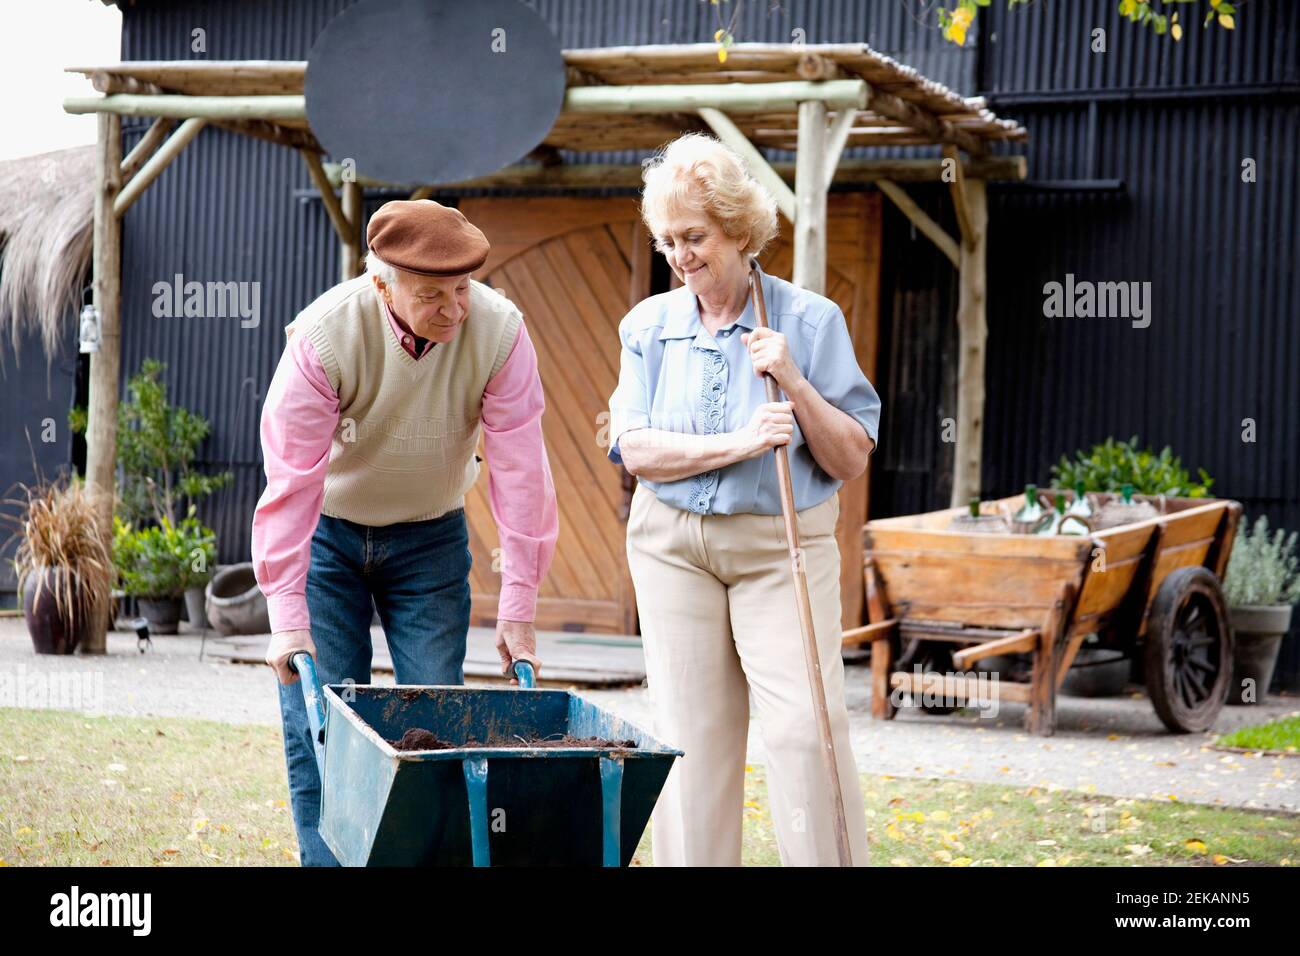 Couple gardening in a lawn Stock Photo